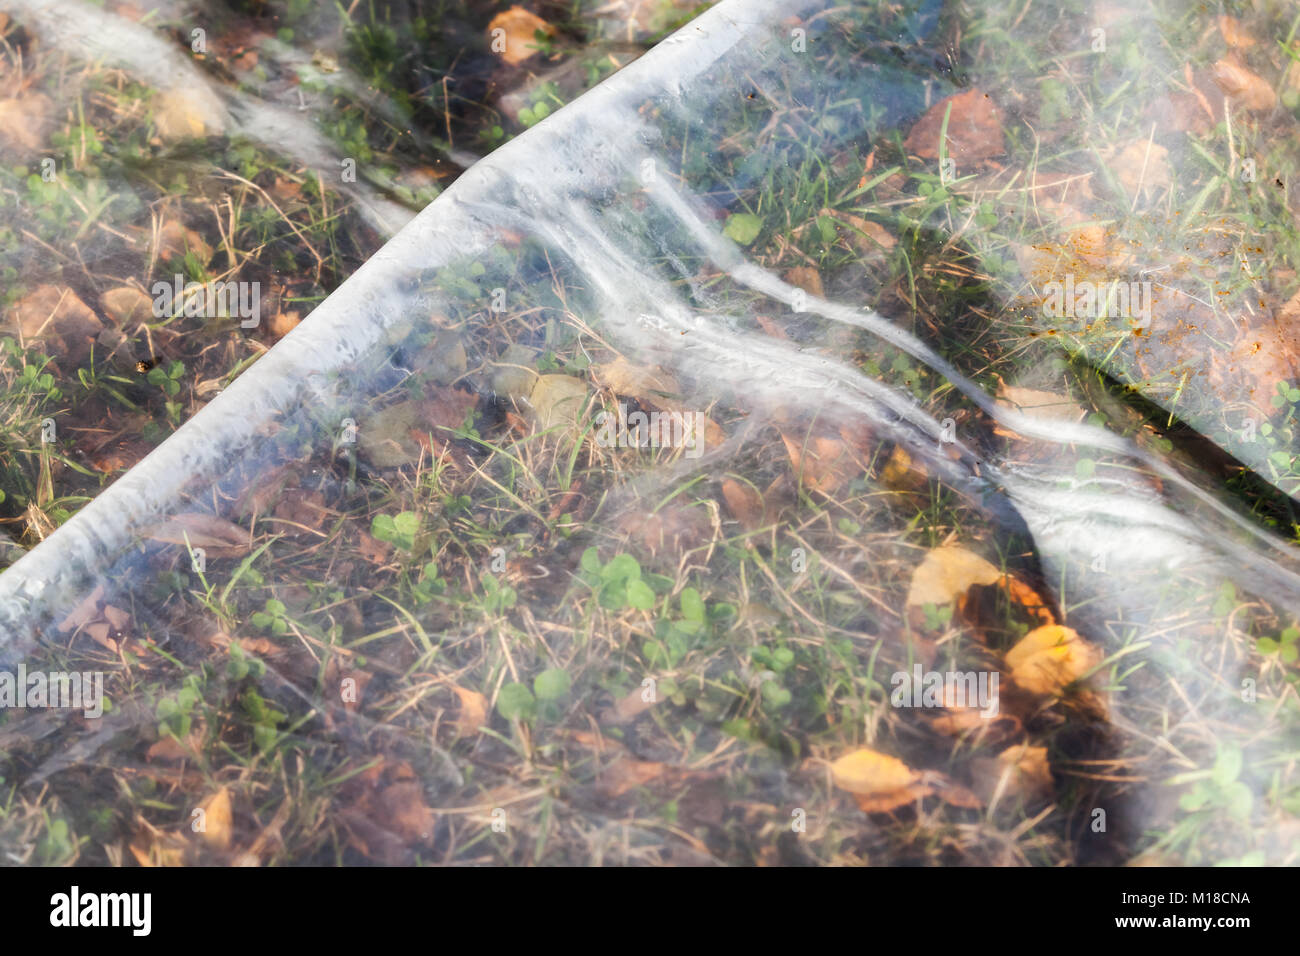 Misted polyethylene film lies on top of natural ground with grass and leaves, the greenhouse effect illustration Stock Photo